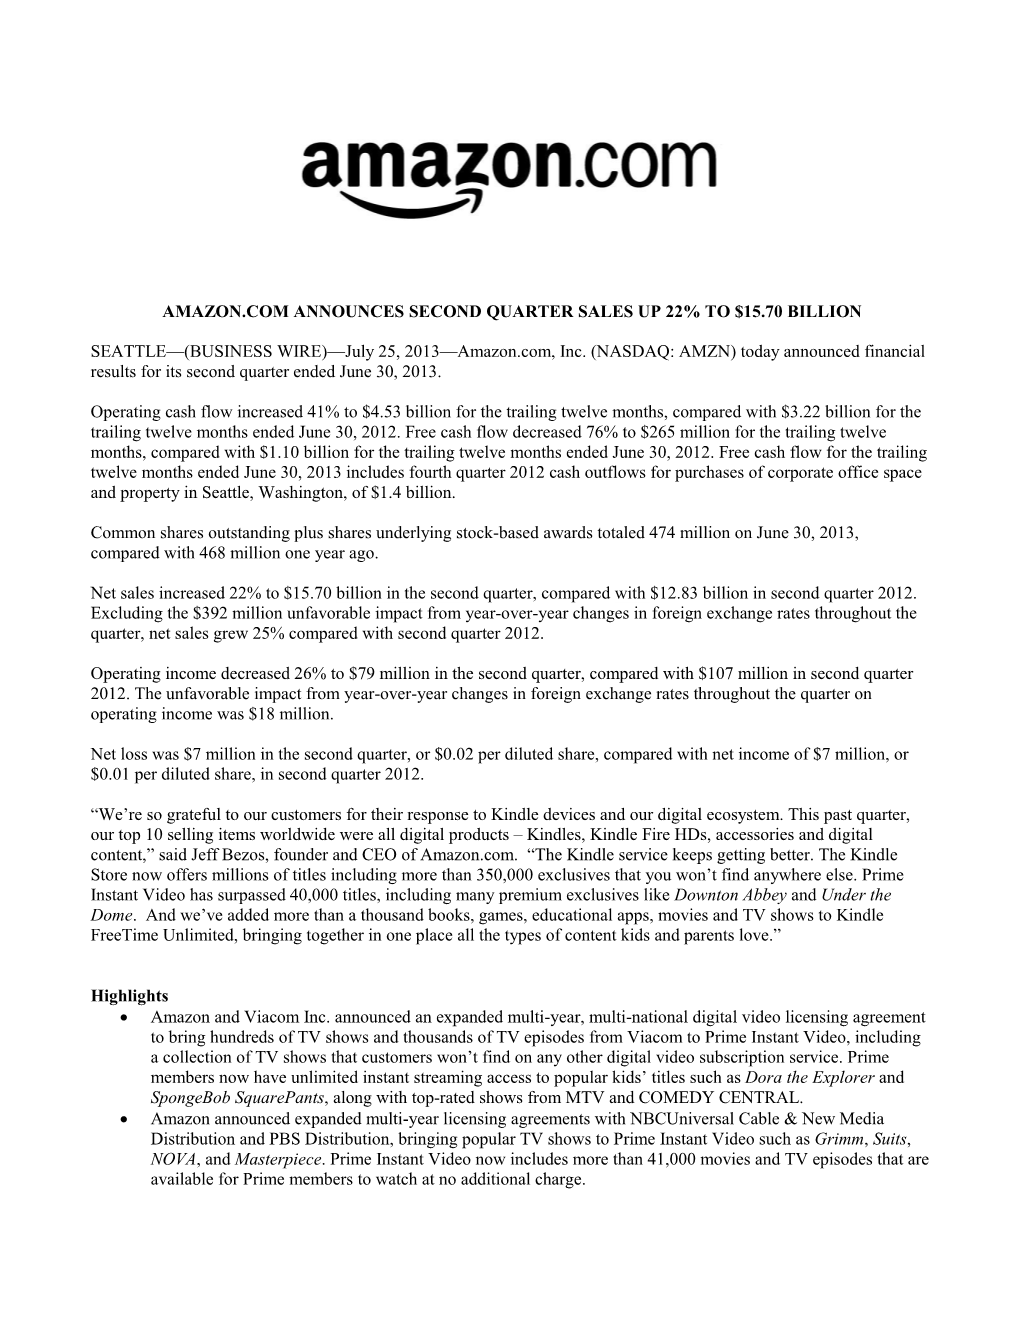 July 25, 2013—Amazon.Com, Inc. (NASDAQ: AMZN) Today Announced Financial Results for Its Second Quarter Ended June 30, 2013